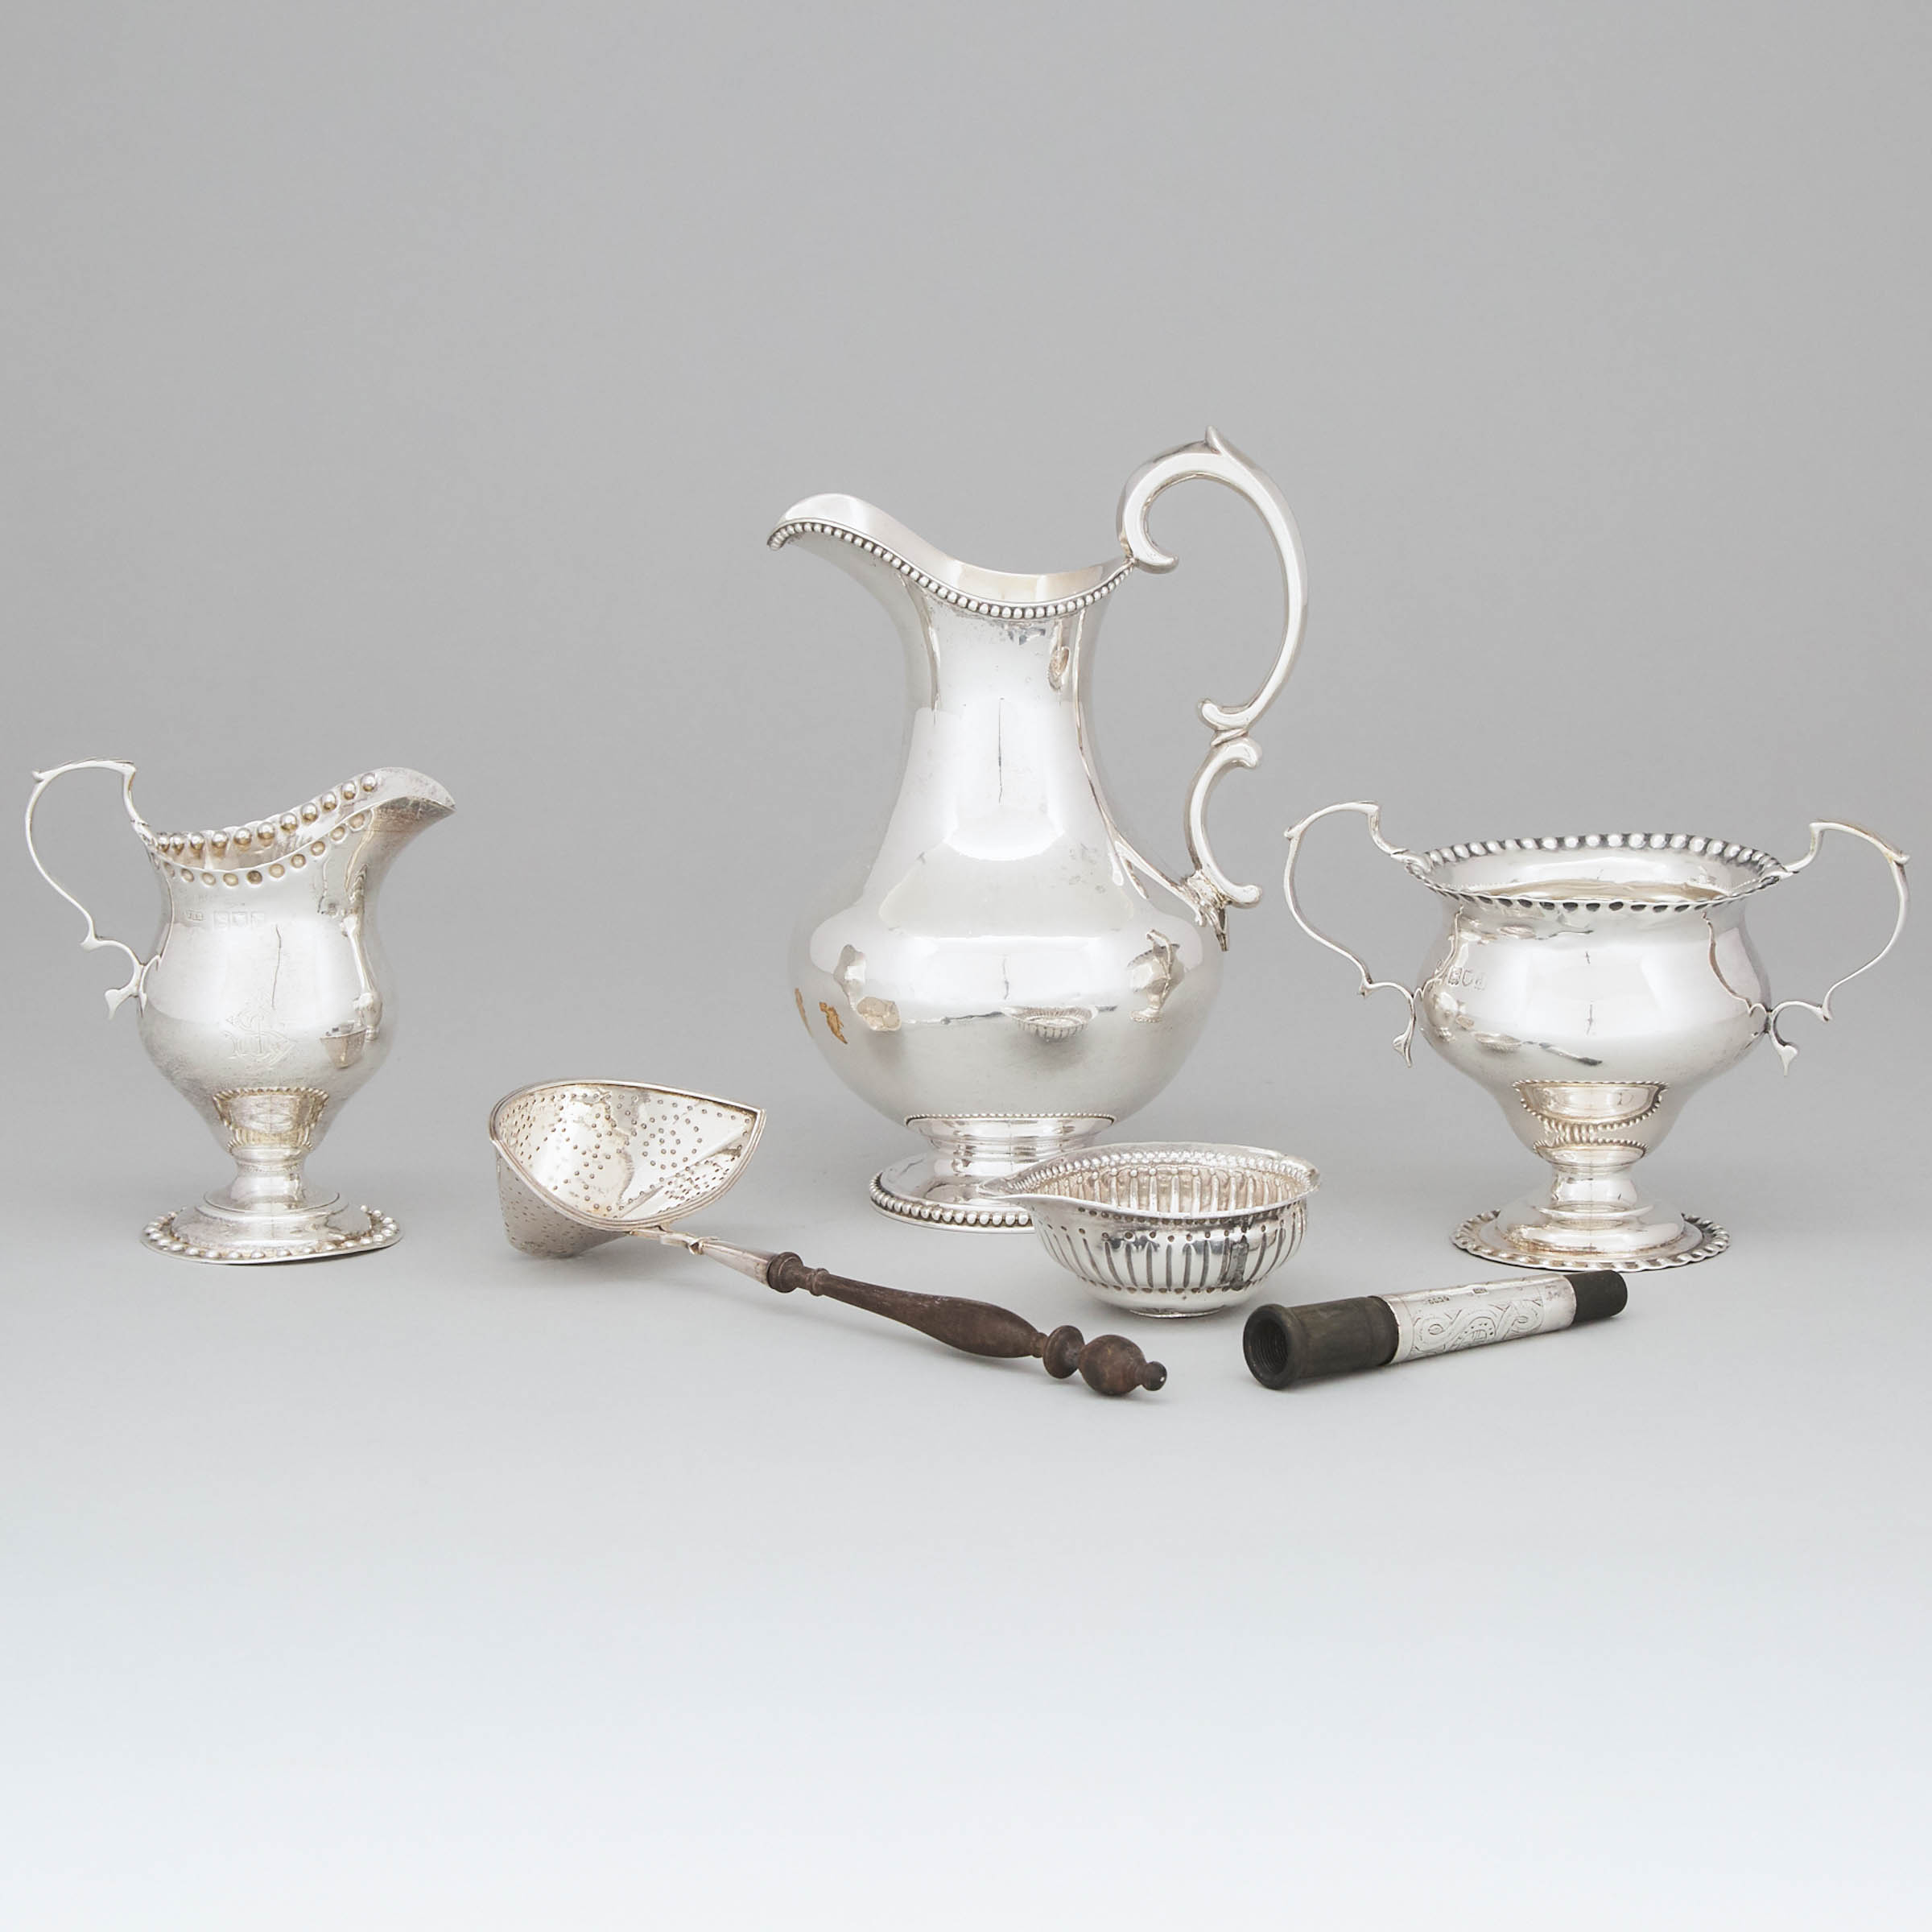 Group of Mainly Georgian and Victorian Silver, 19th century